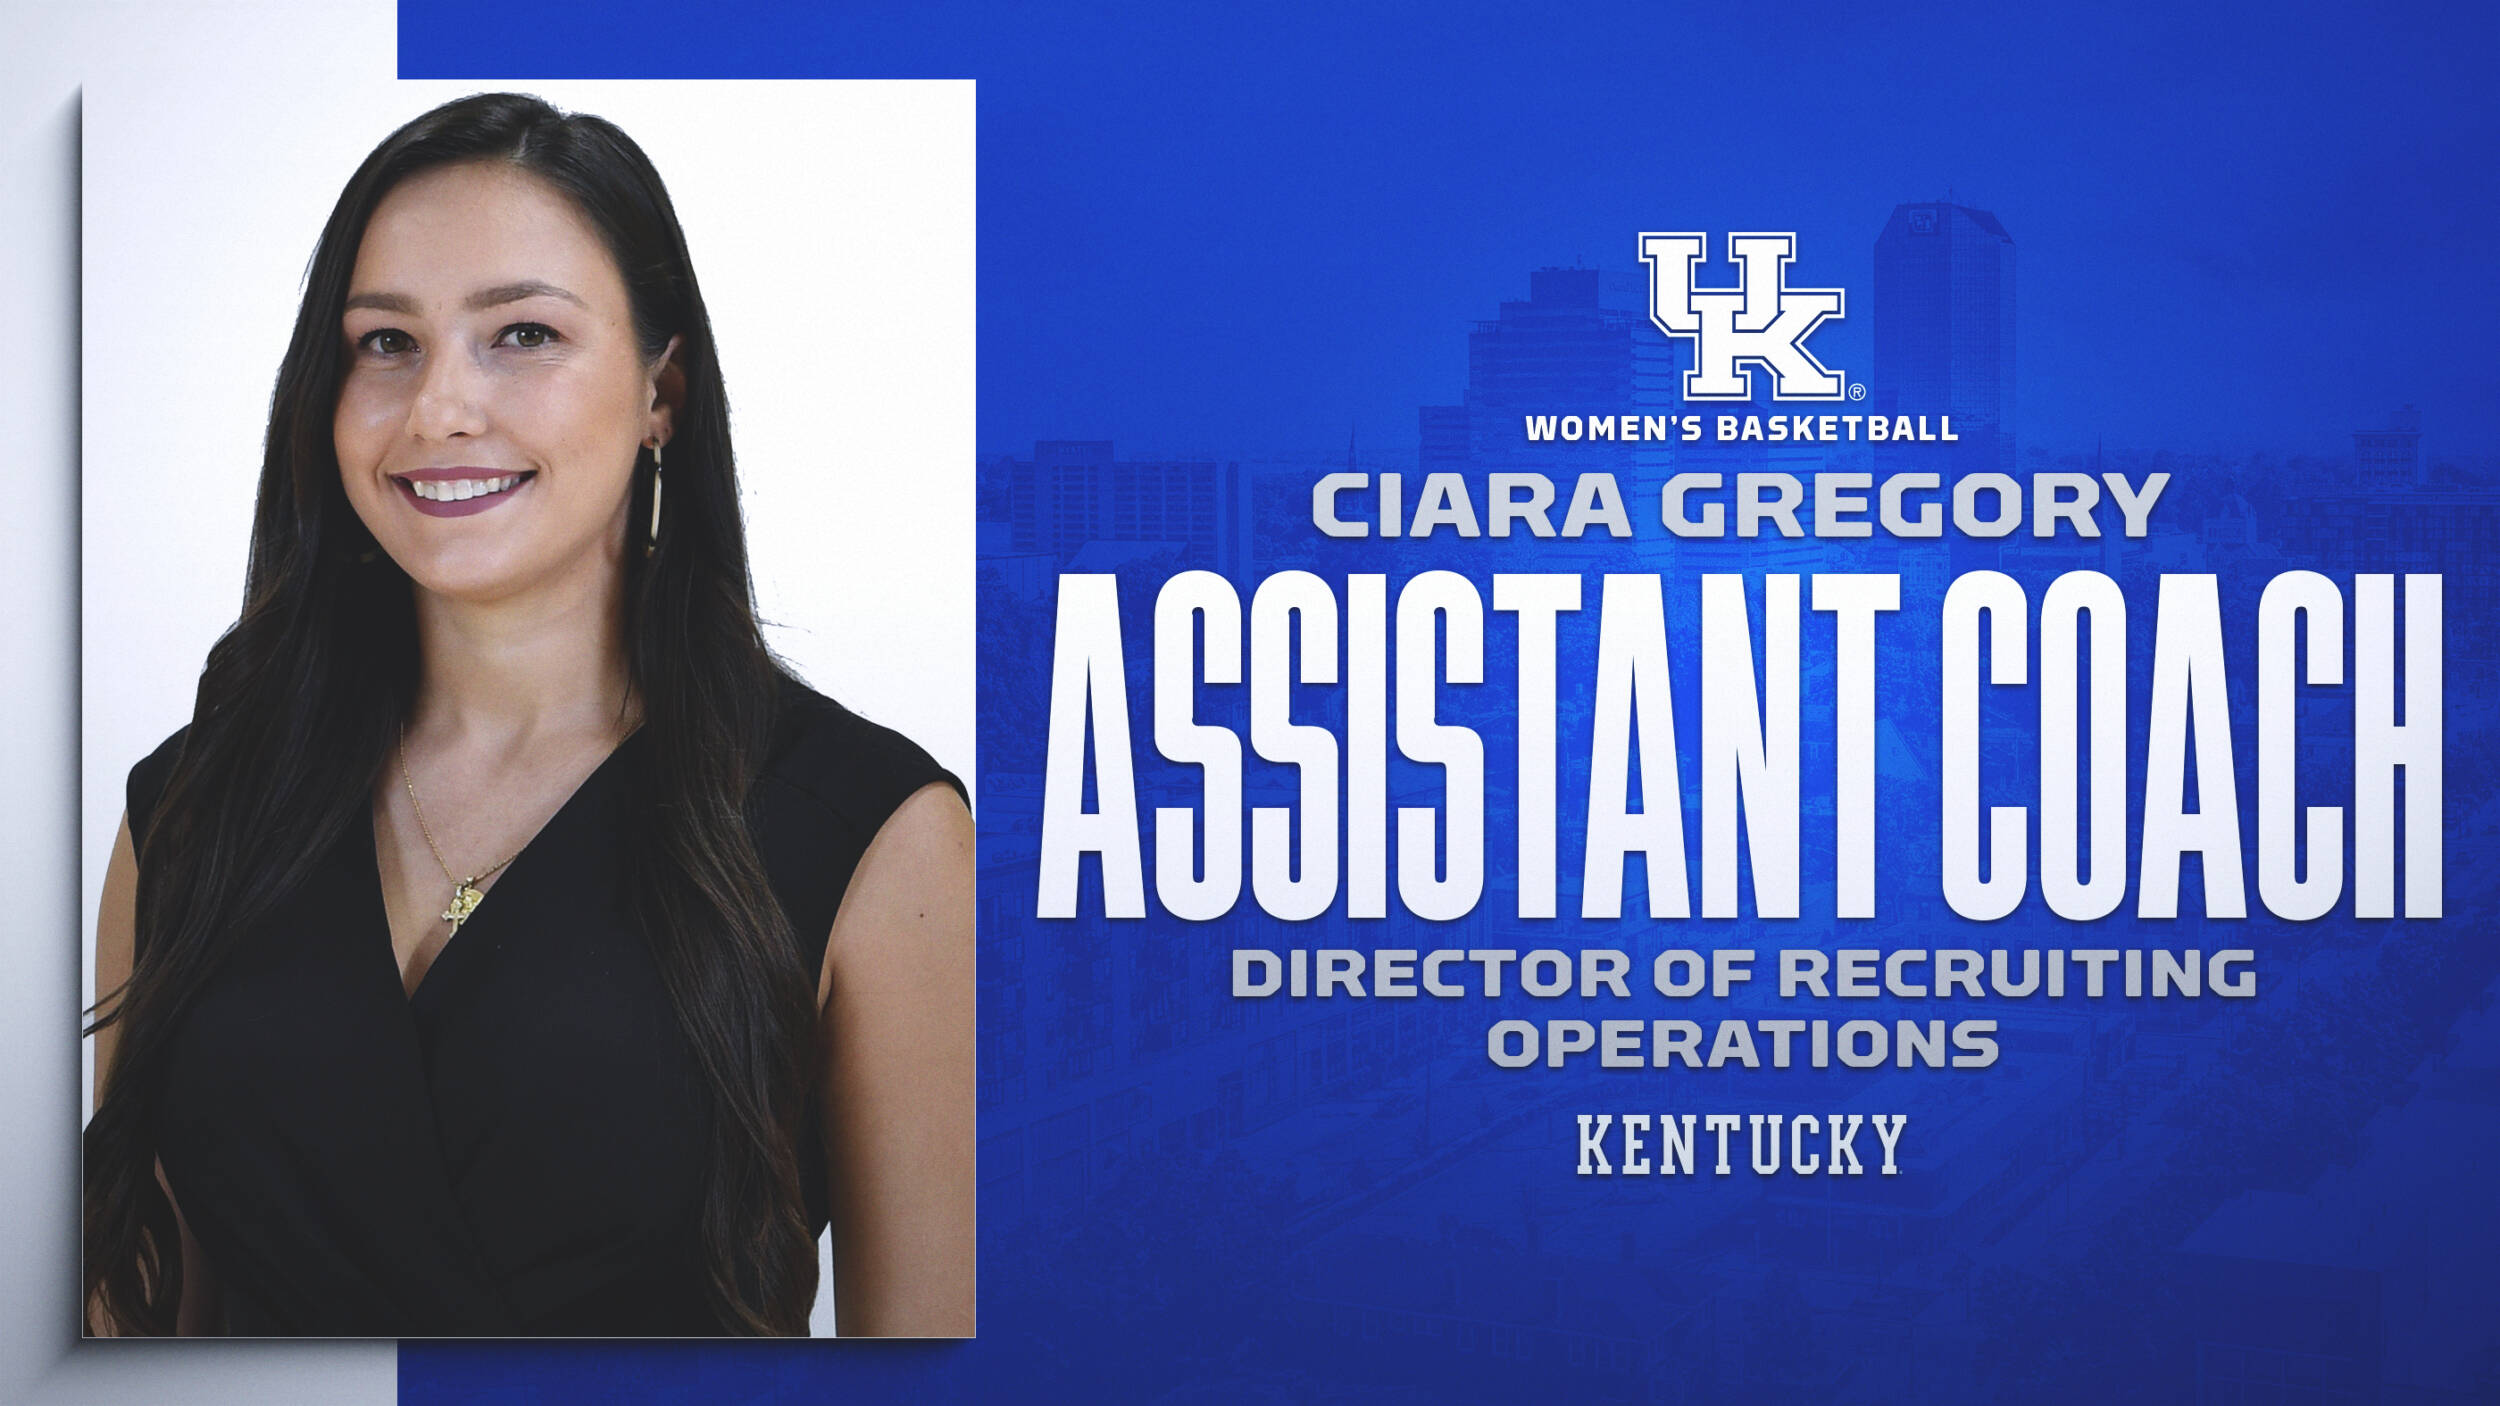 Kenny Brooks Has Hired Ciara Gregory as an Assistant Coach, Director of Recruiting Operations